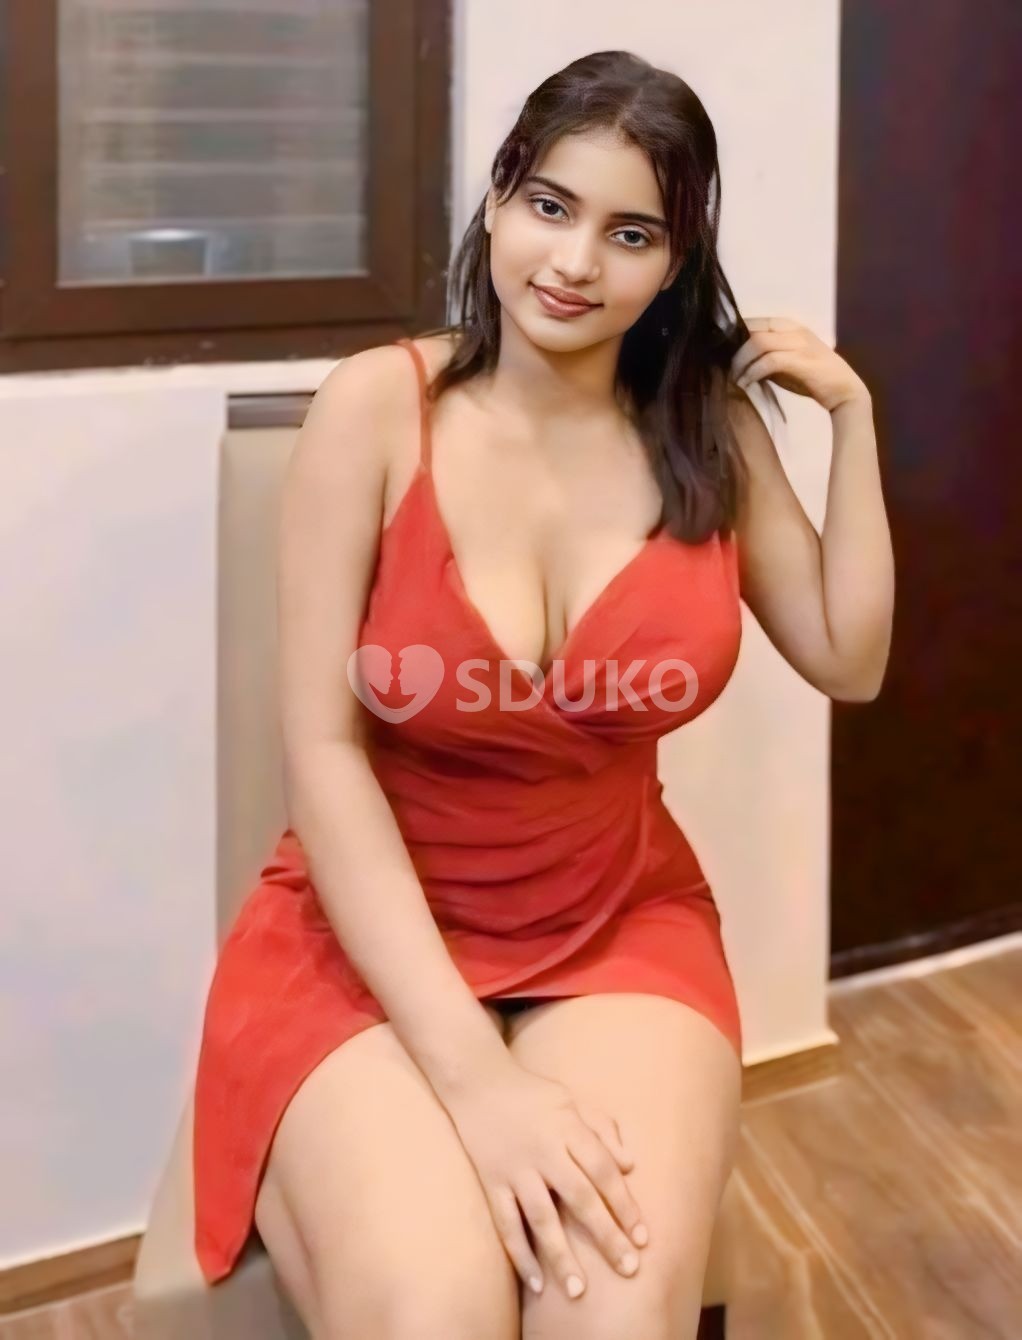 Chembur..❤️❤️ MYSELF SWETA CALL GIRL & BODY-2-BODY MASSAGE SPA SERVICES OUTCALL OUTCALL INCALL 24 HOURS WHATSAPP